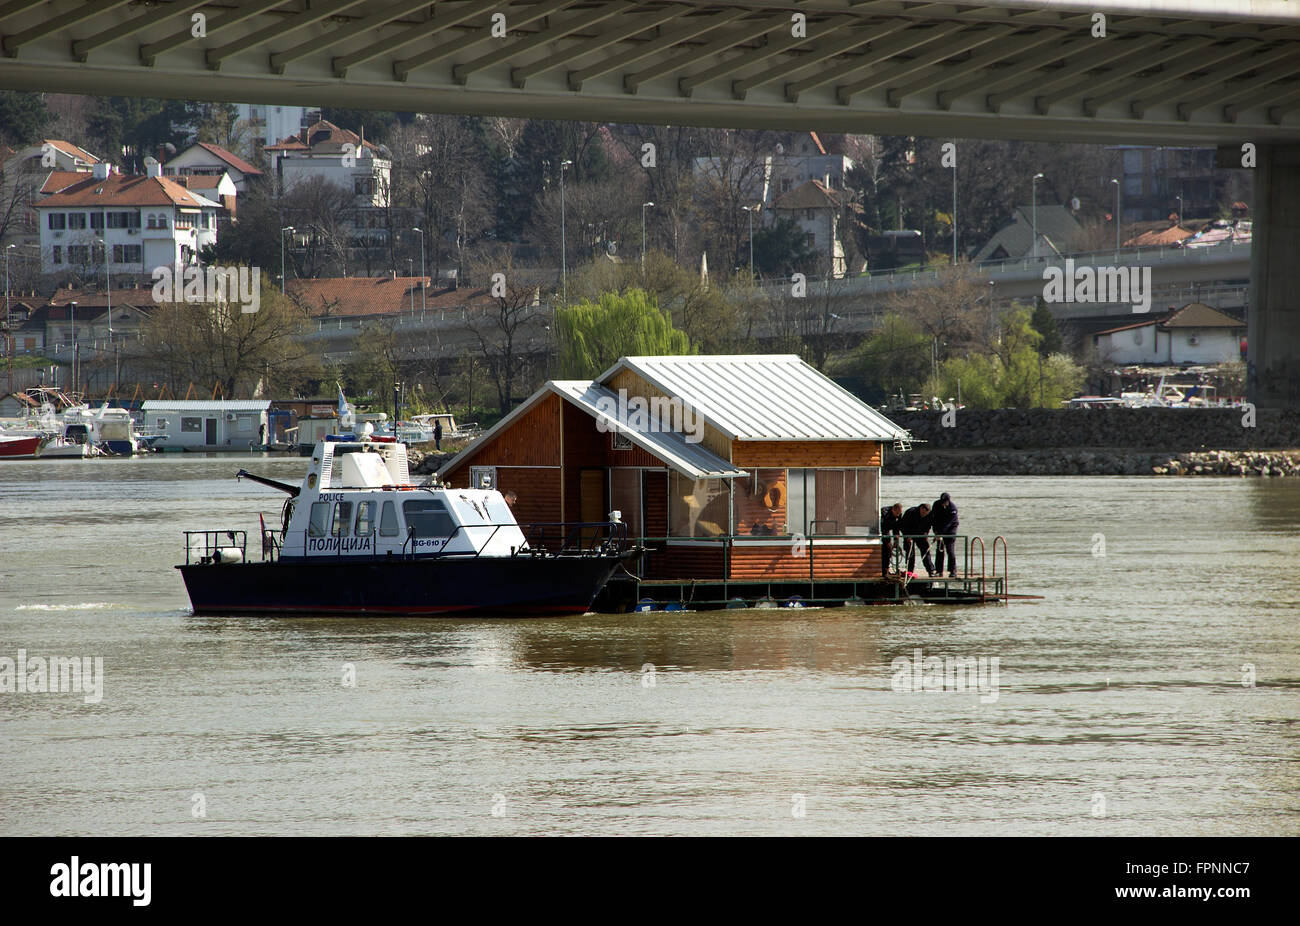 Sava river, Belgrade - Members of the river police making efforts to take control of an undocked raft house in a river currents Stock Photo